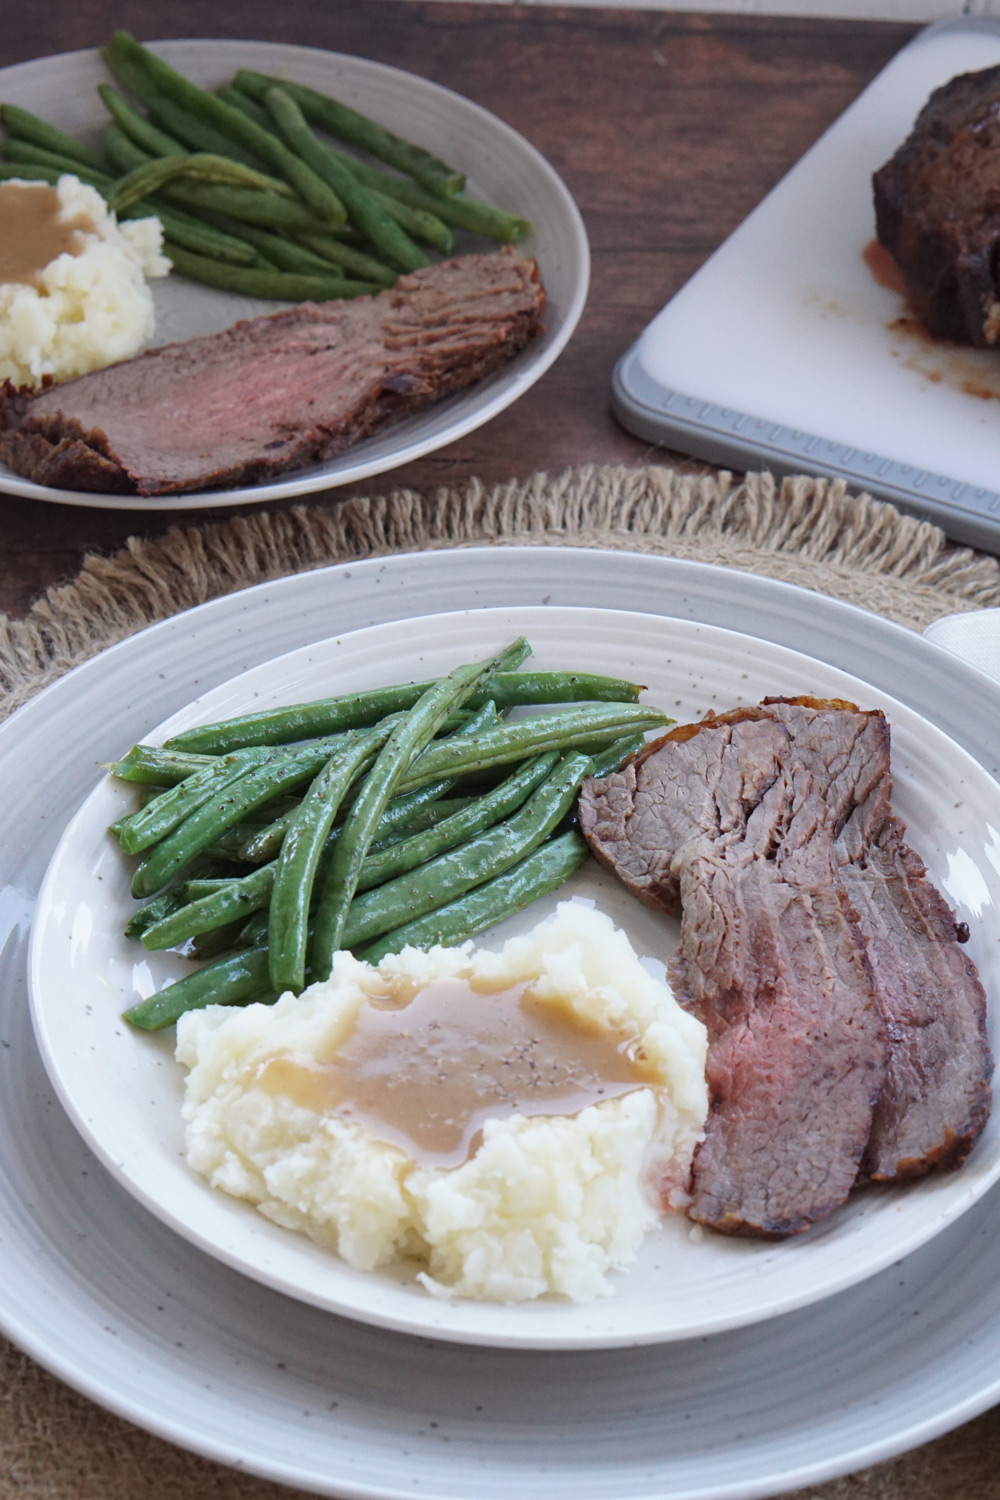 Sliced beef roast with green beans and mashed potatoes